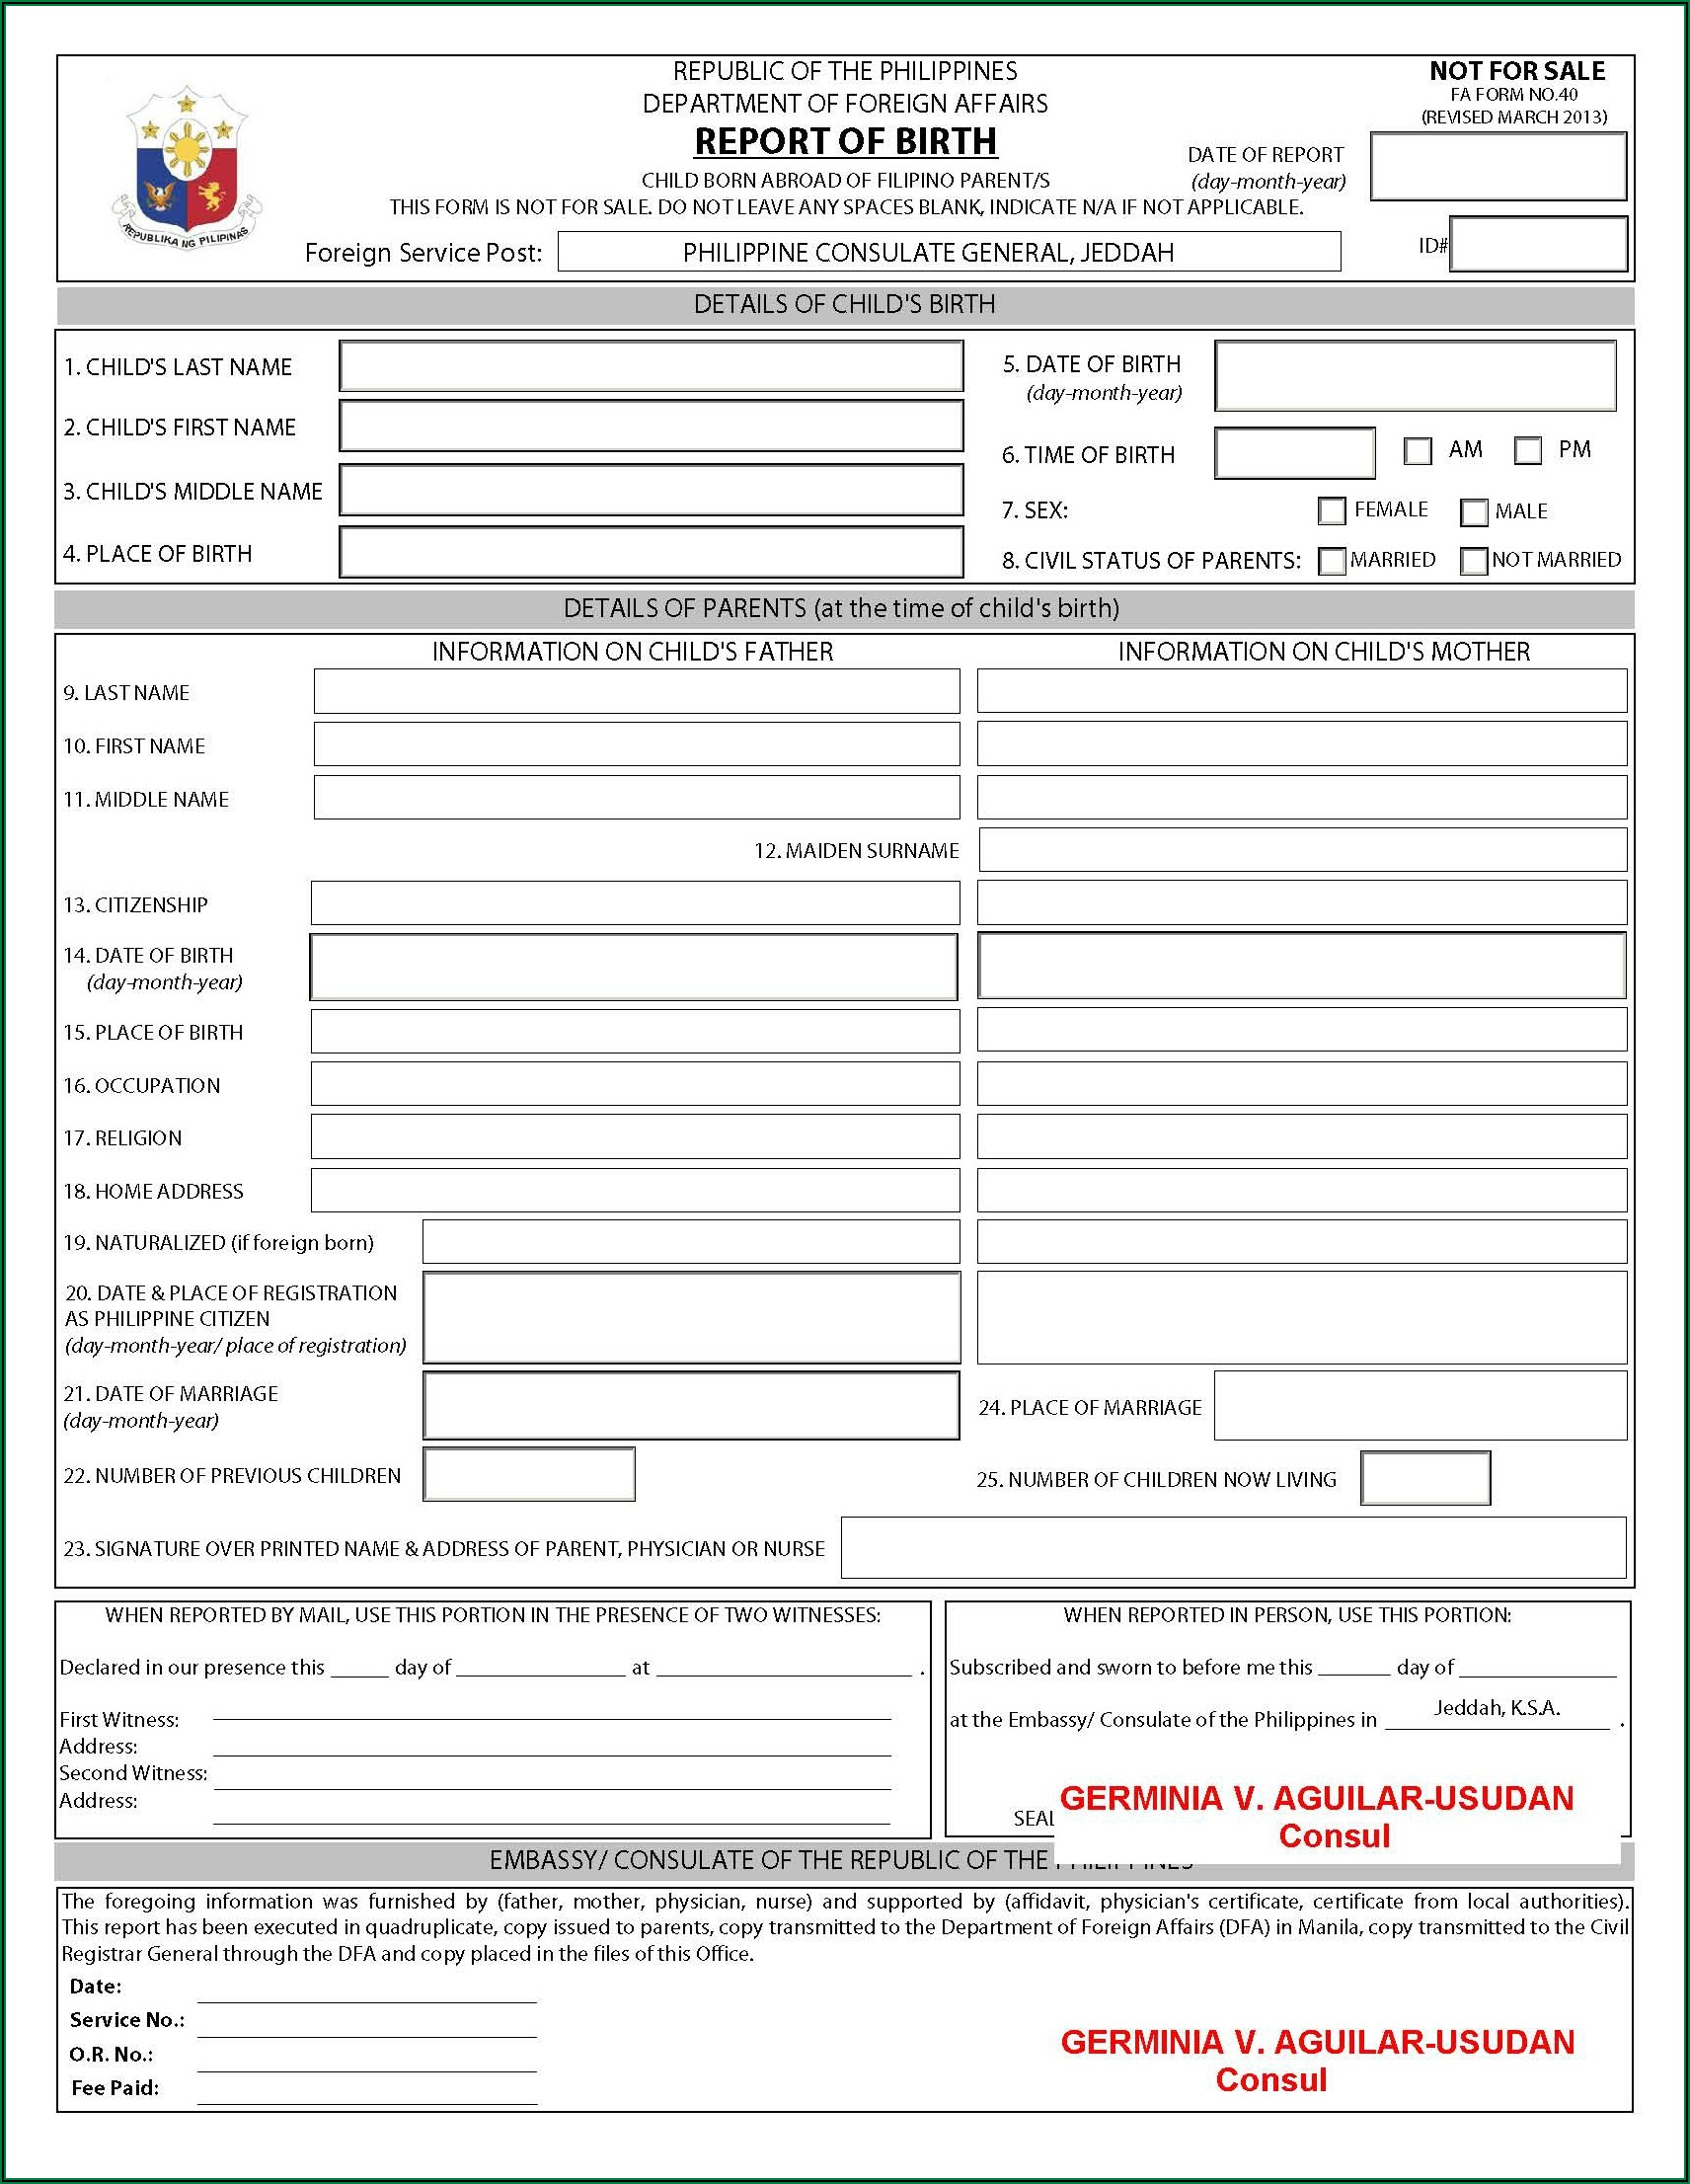 Application Form For Renewal Of Philippine Passport In Abu 